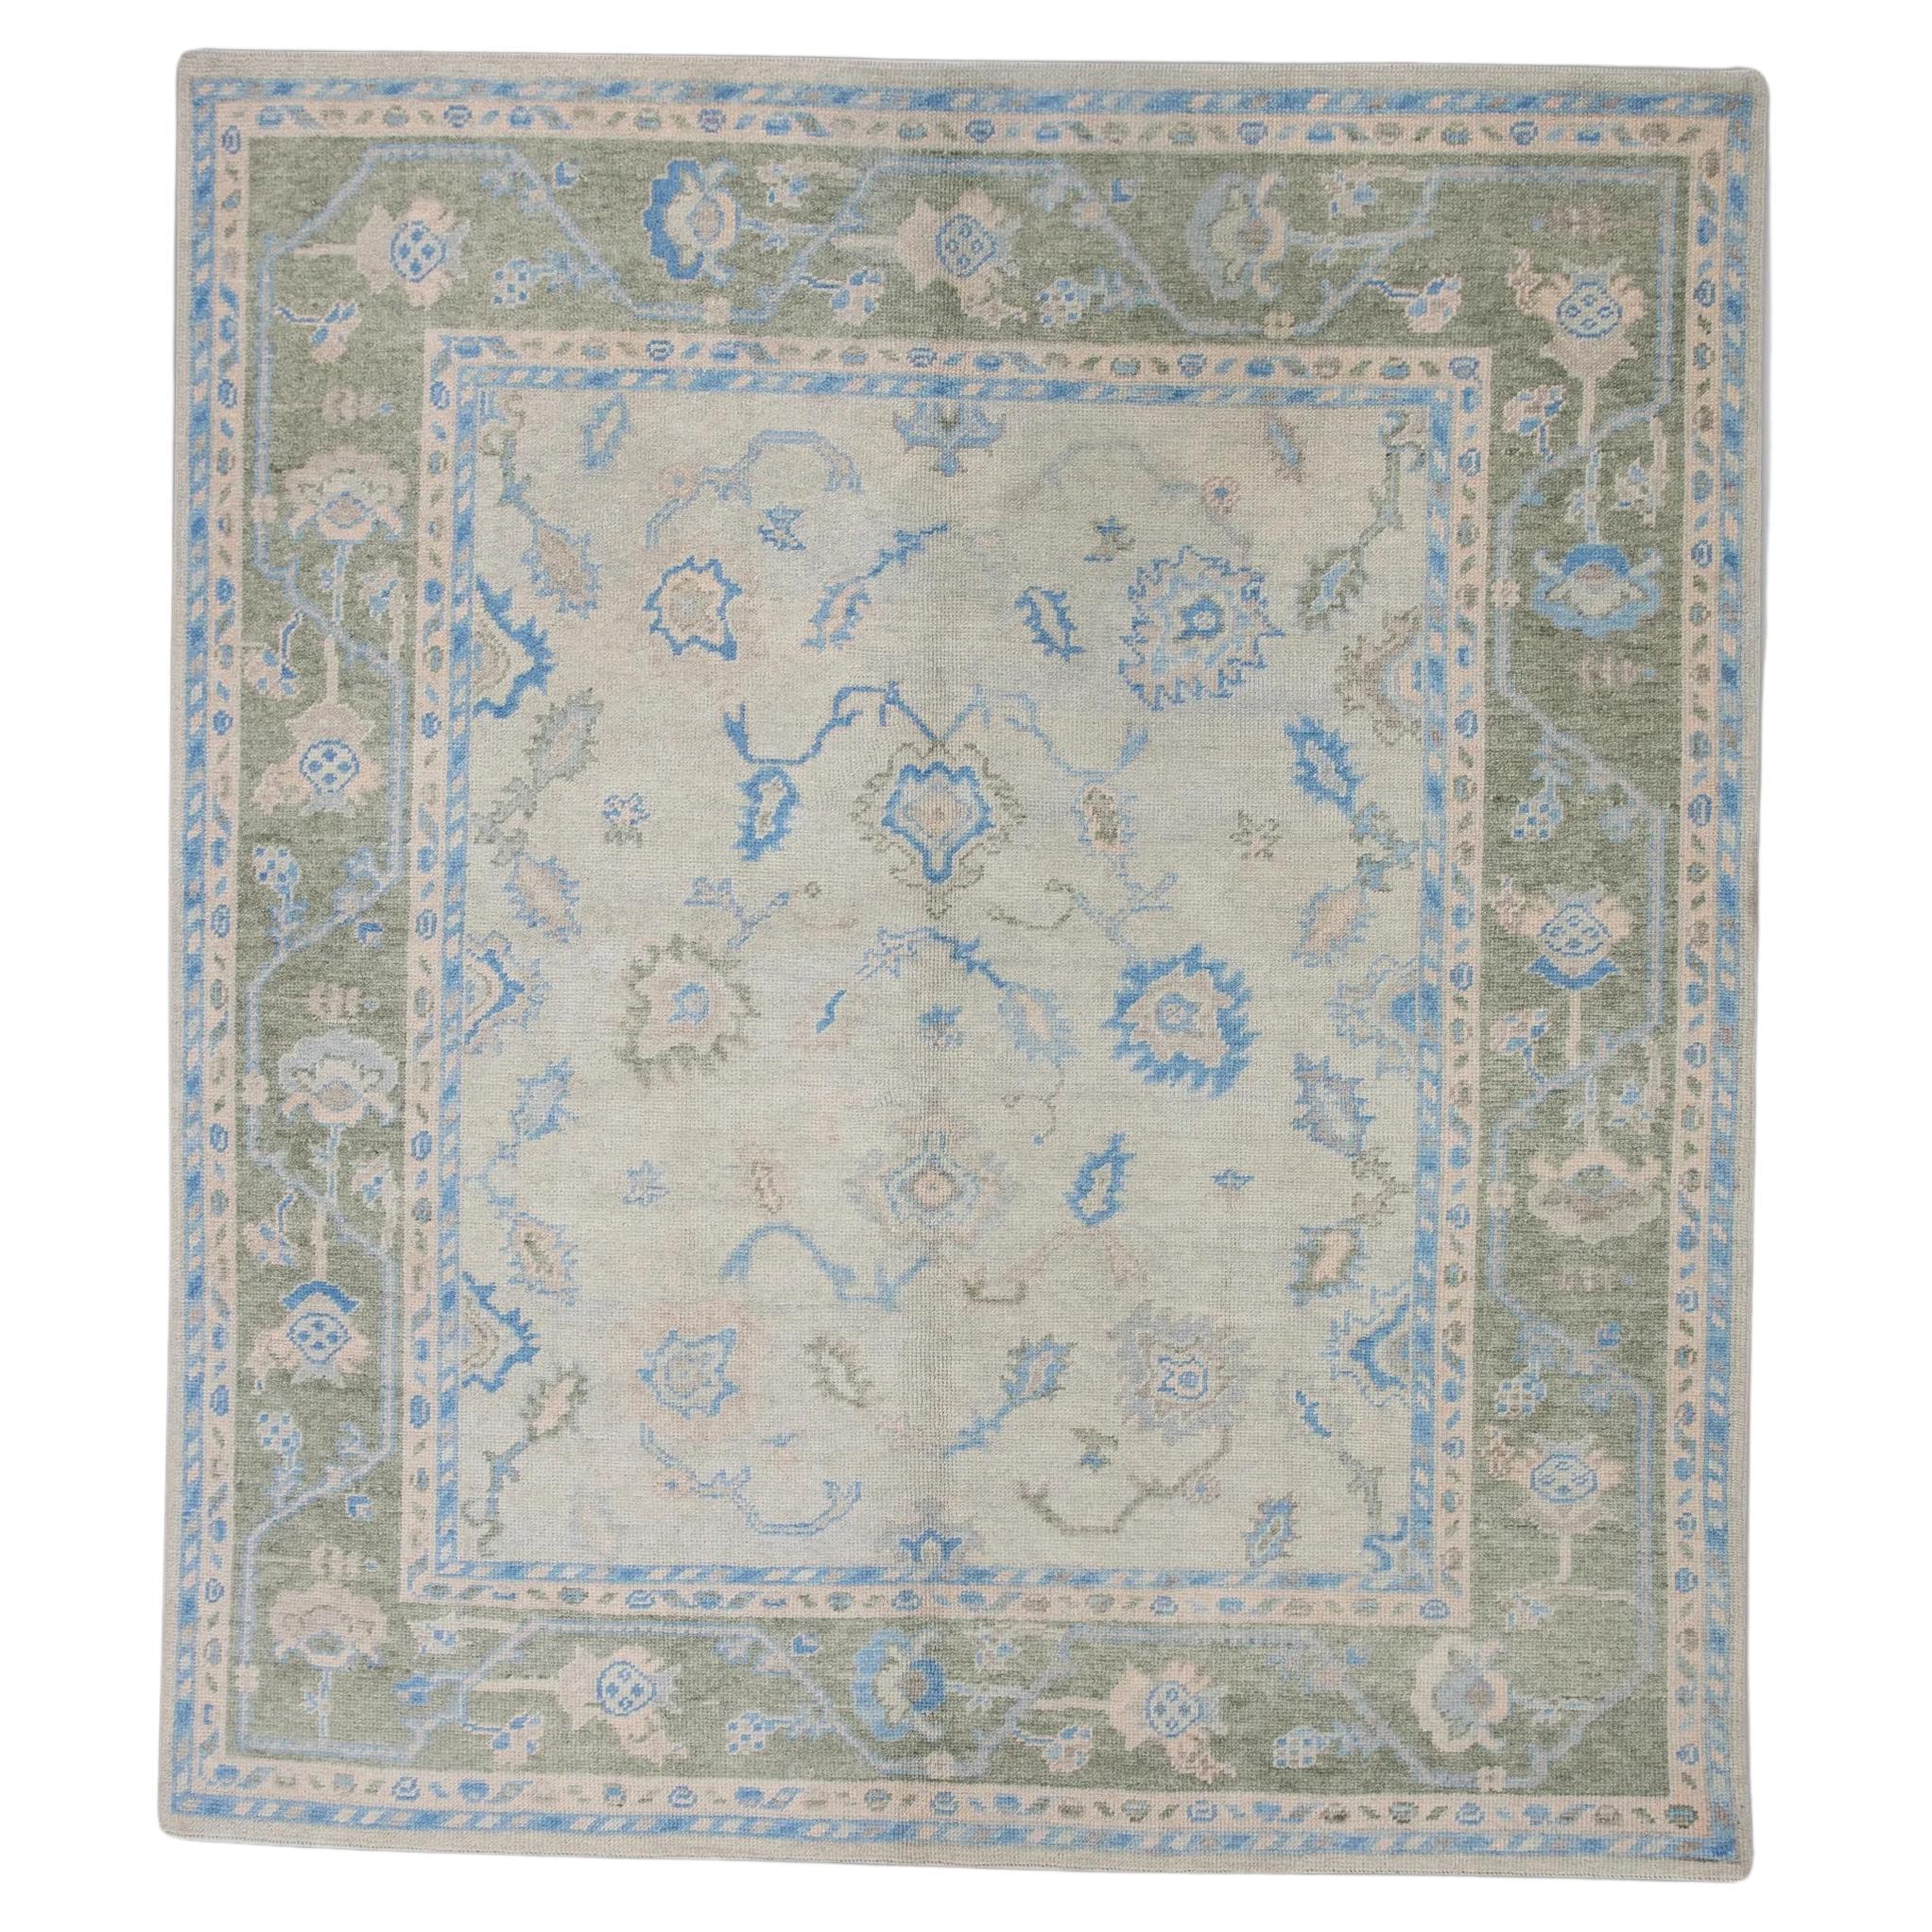 Green and Blue Floral Pattern Handwoven Wool Turkish Oushak Rug 6'10" x 8'1" For Sale